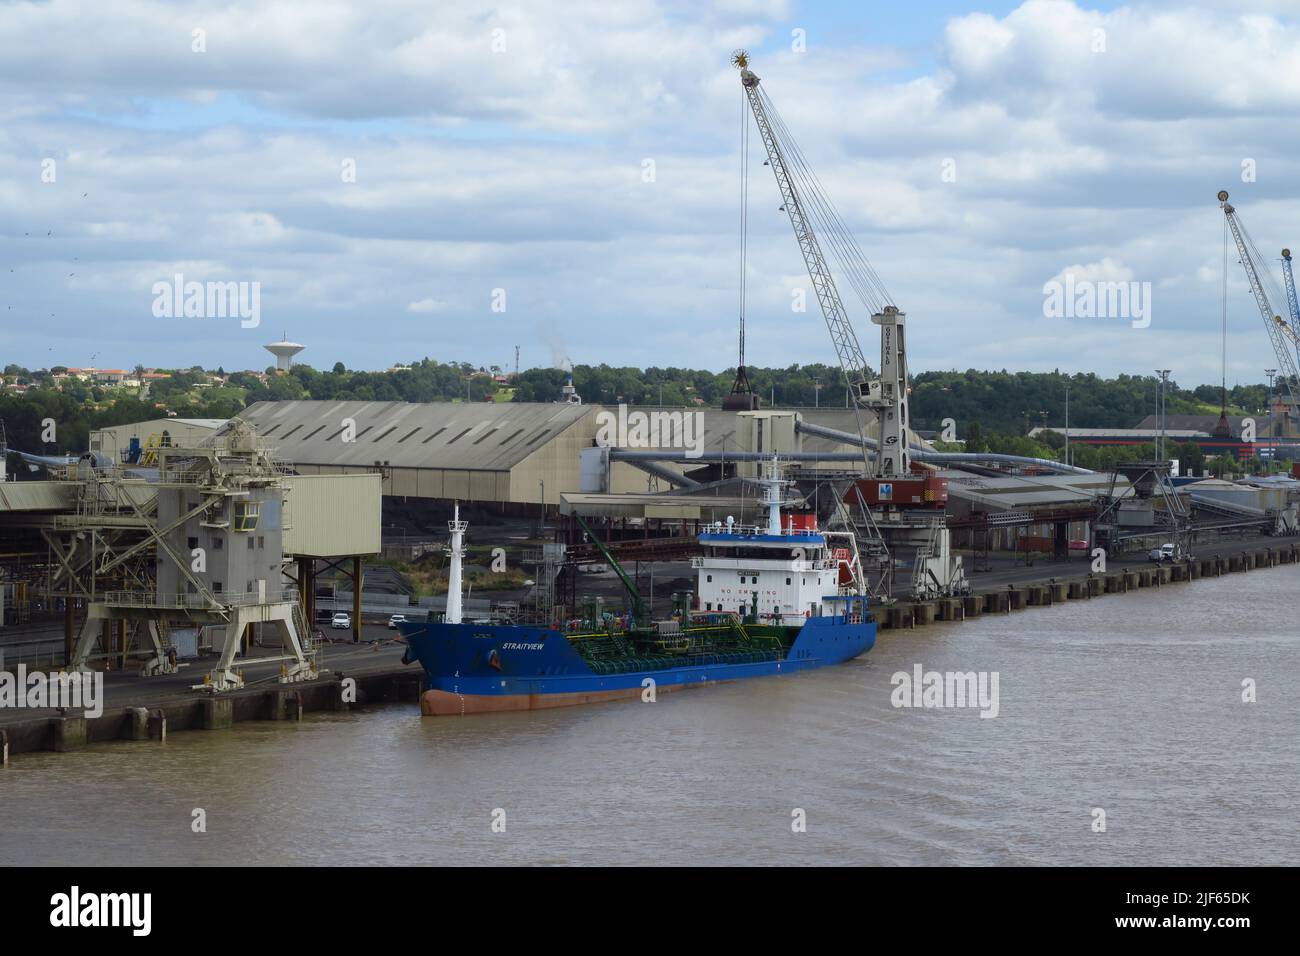 MS Straitview, a general tanker ship, berthed on the Garonne River downstream from the French city of Bordeaux Stock Photo